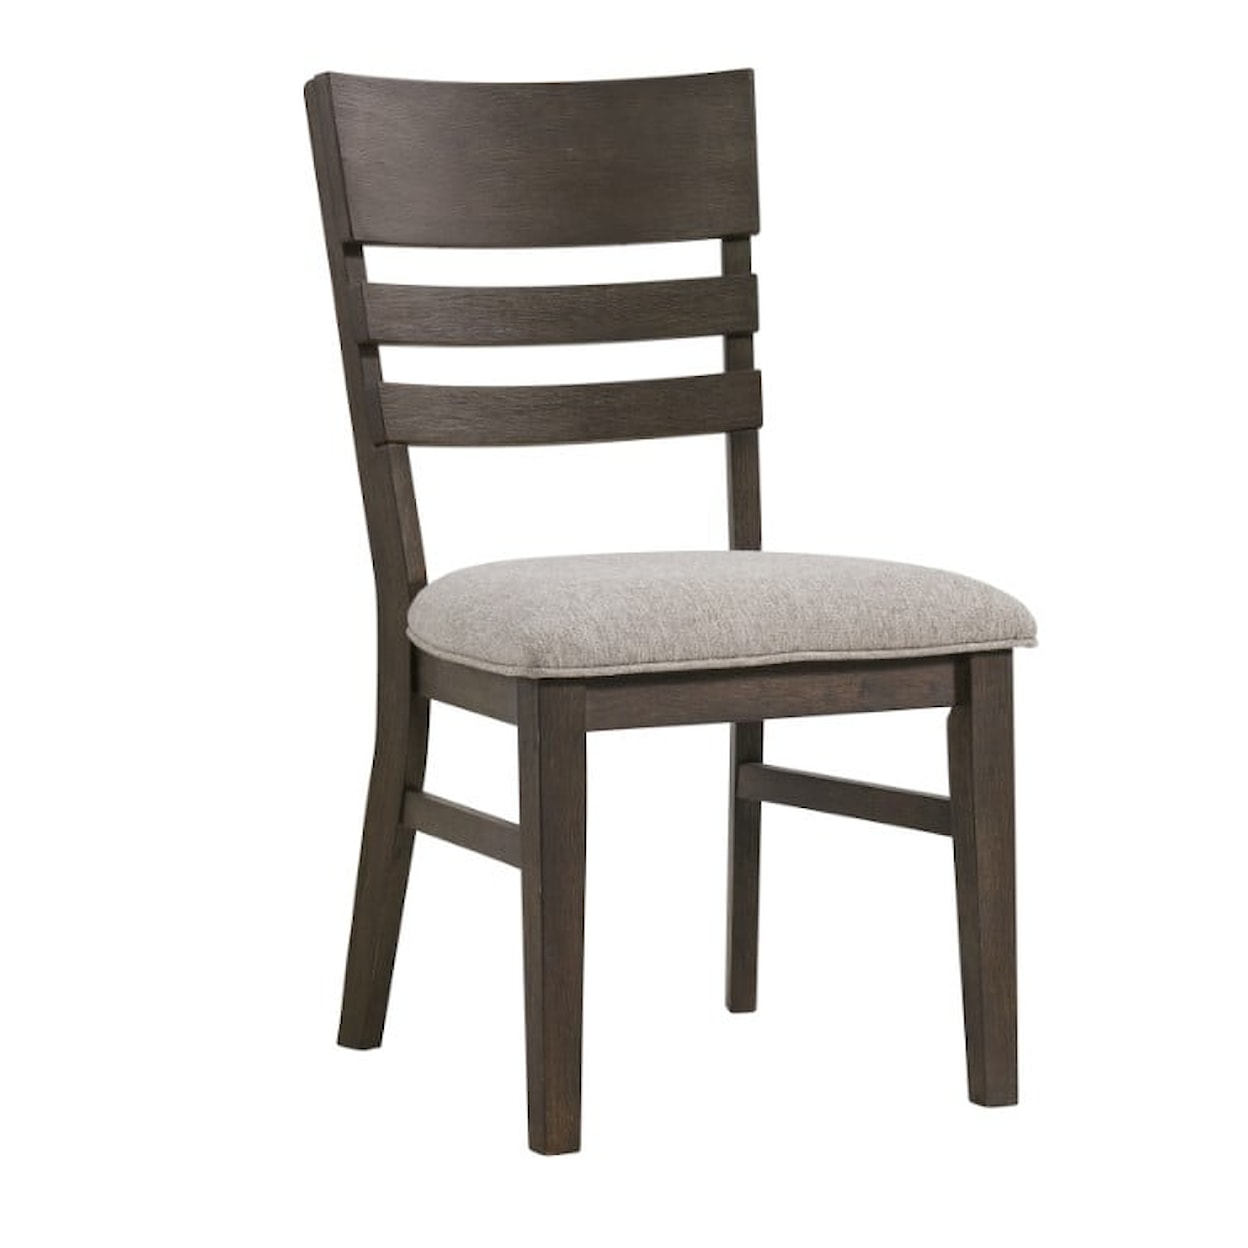 Intercon Hearst Upholstered Side Chair